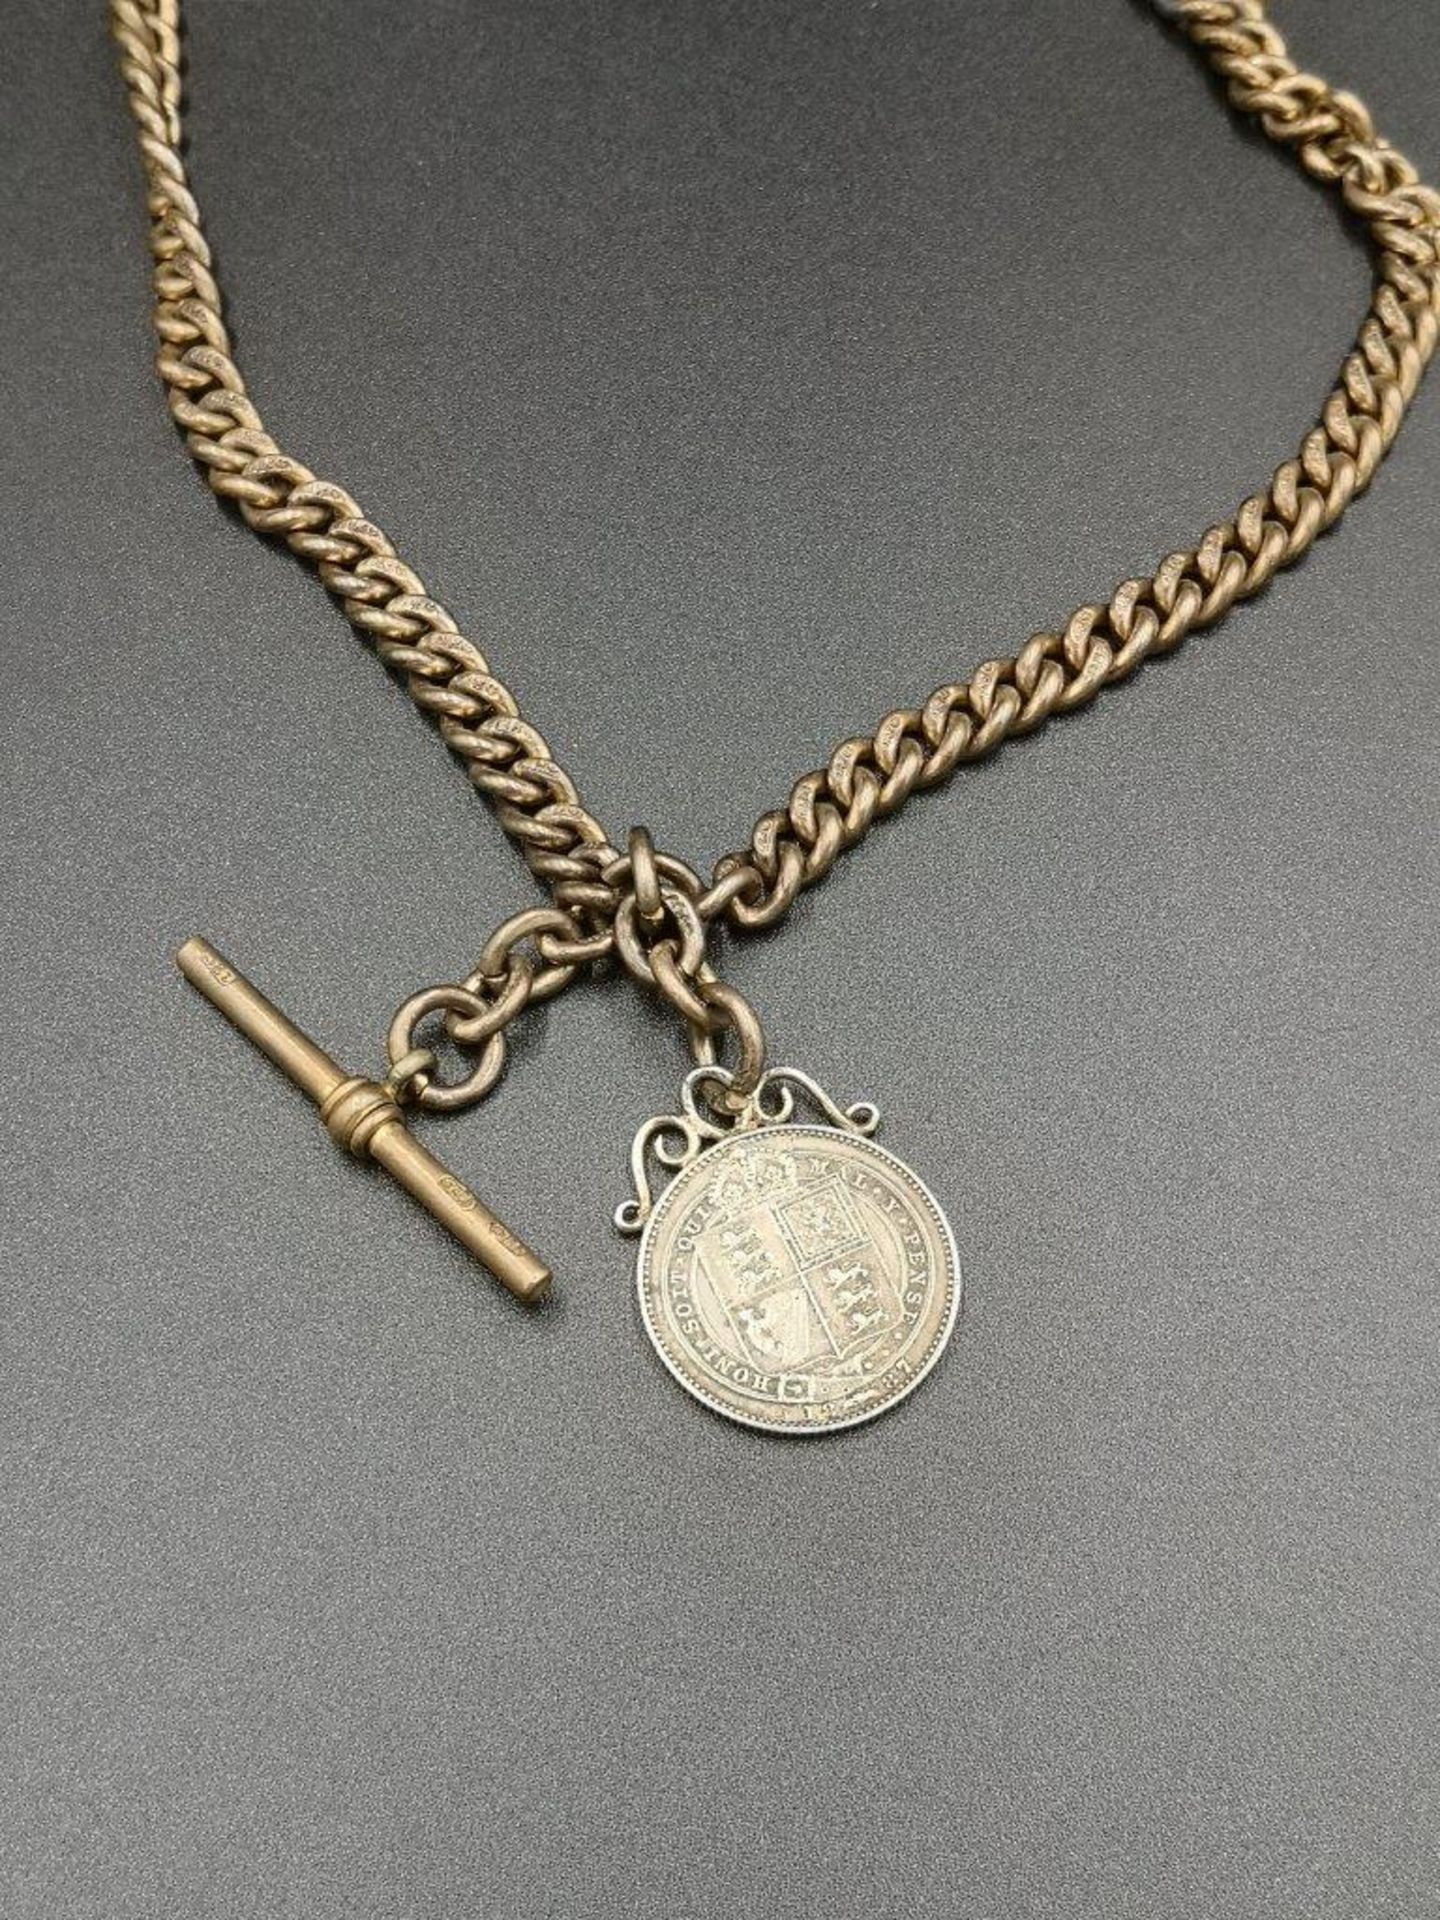 18ct gold fob chain with mounted silver sixpence 1887 - Image 3 of 6